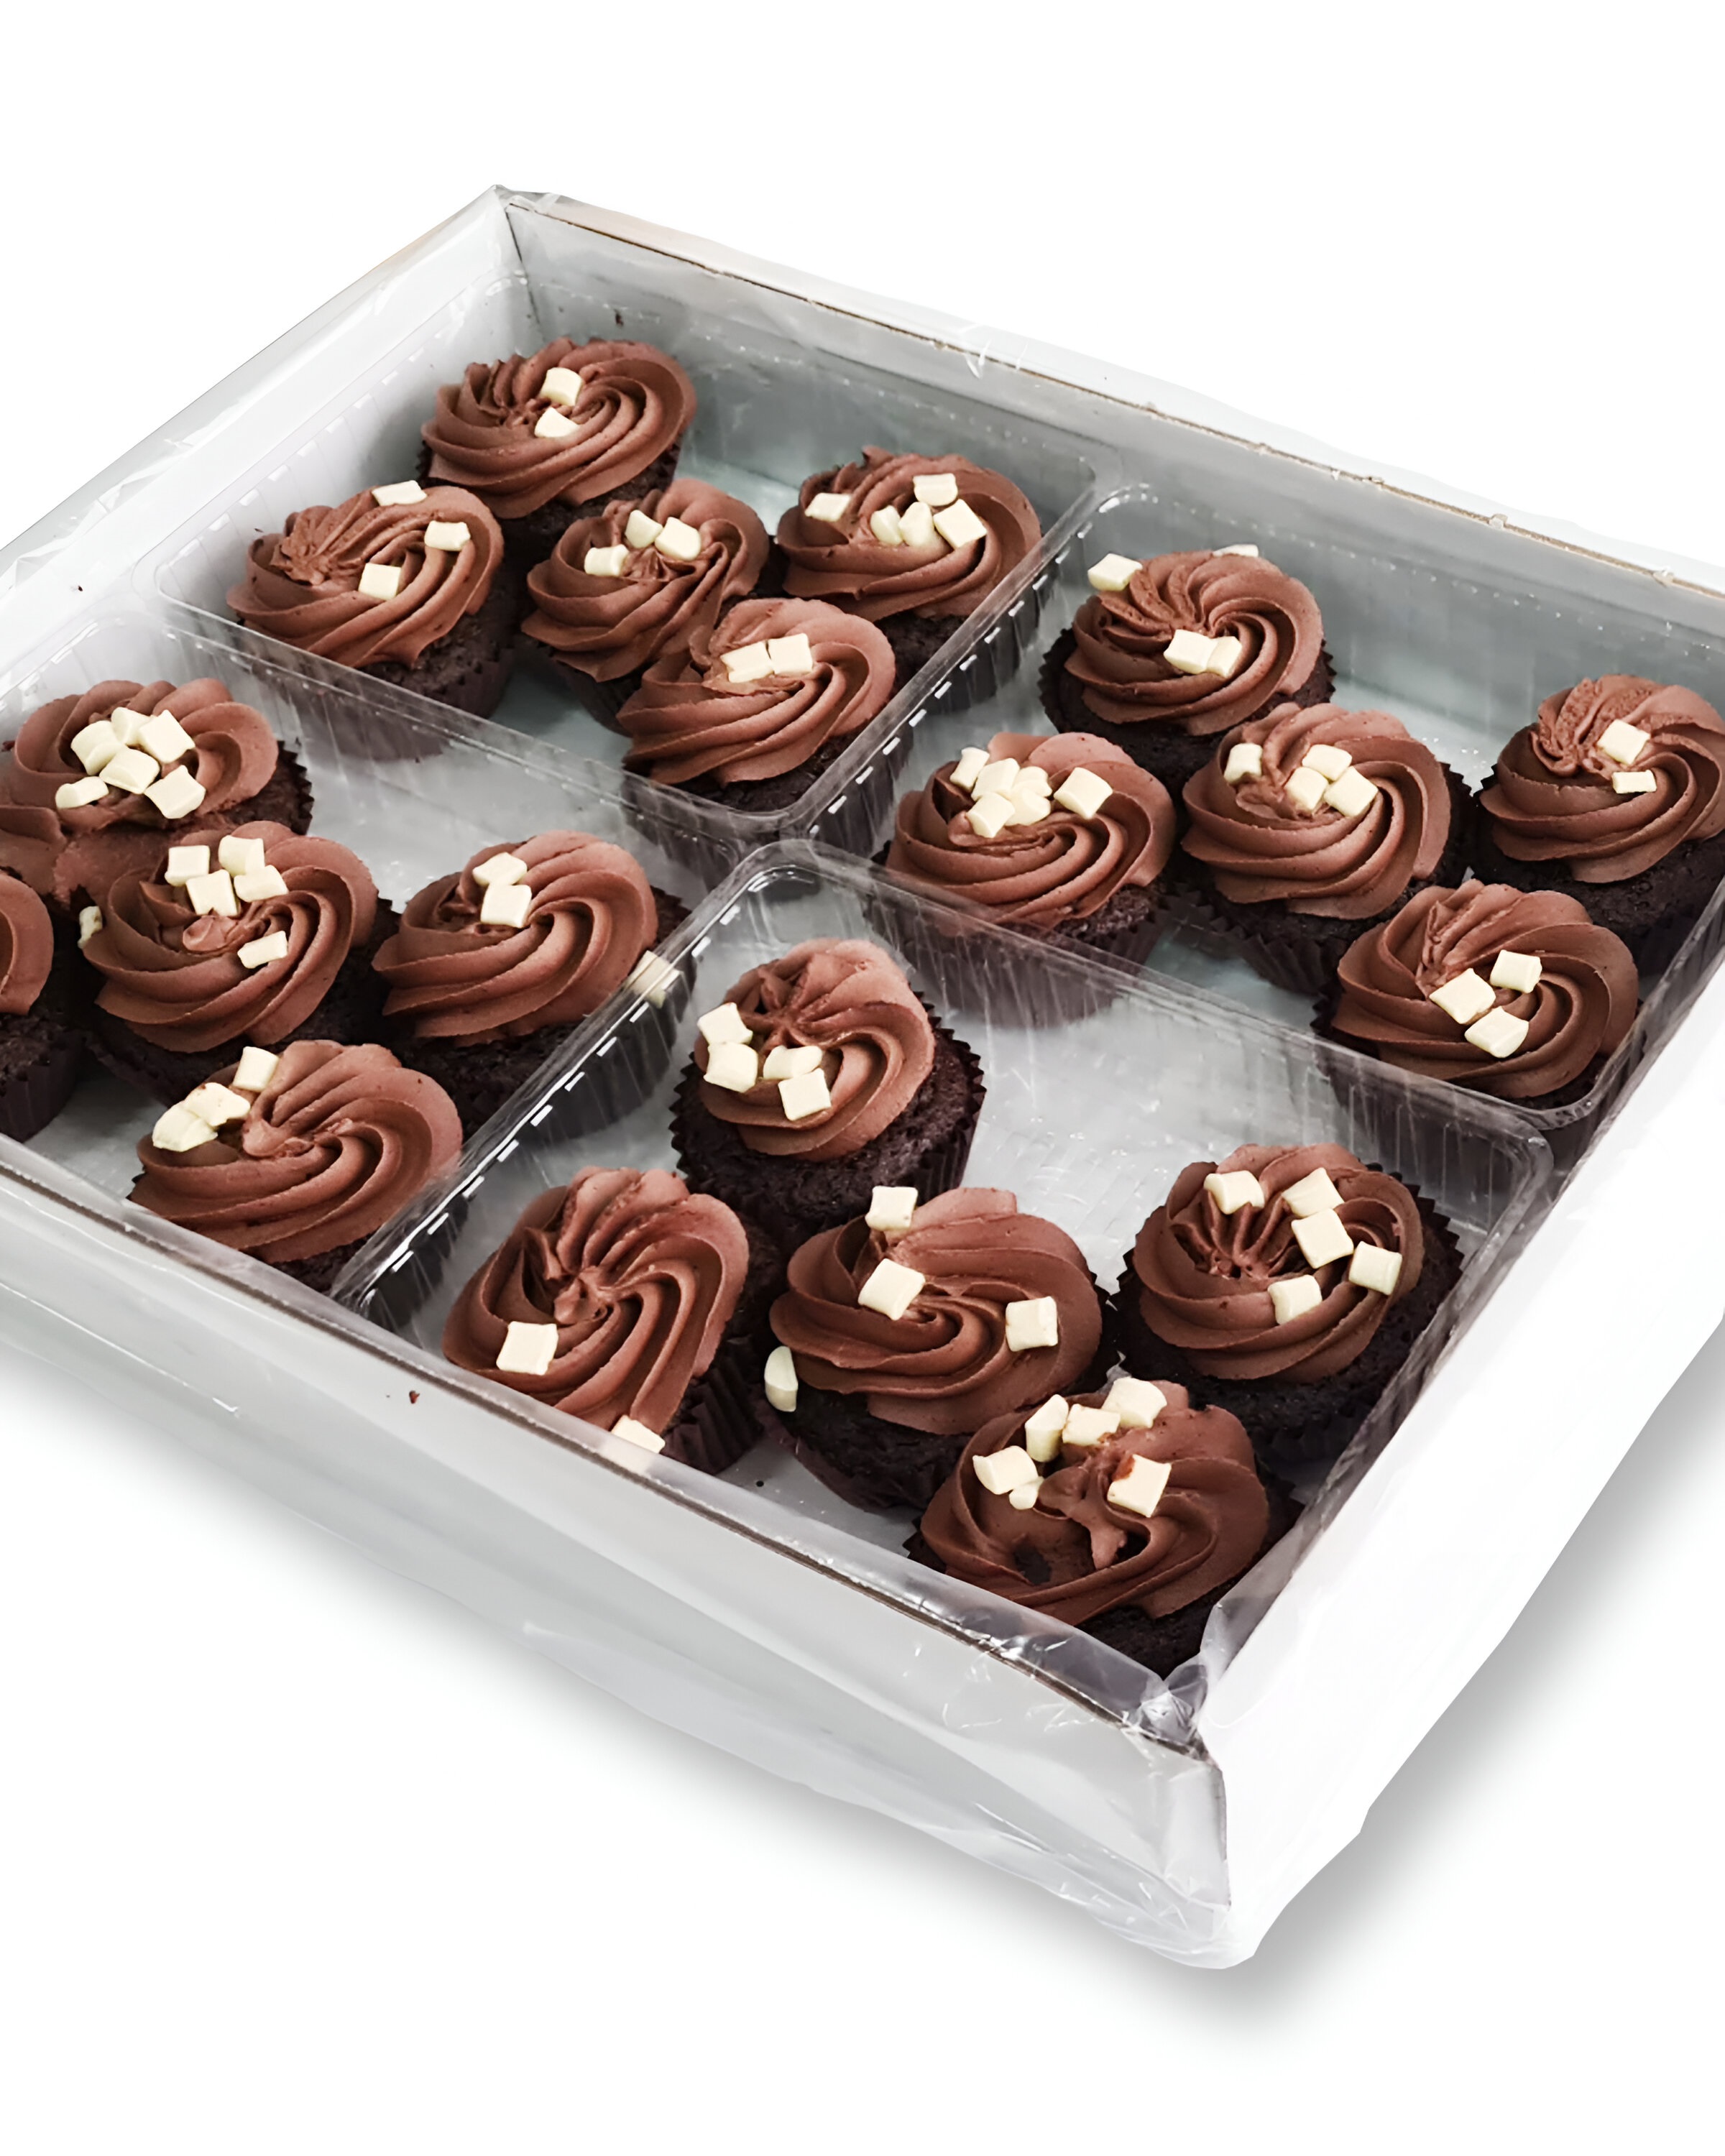 CUPCAKES CACAO GRANEL 1KG